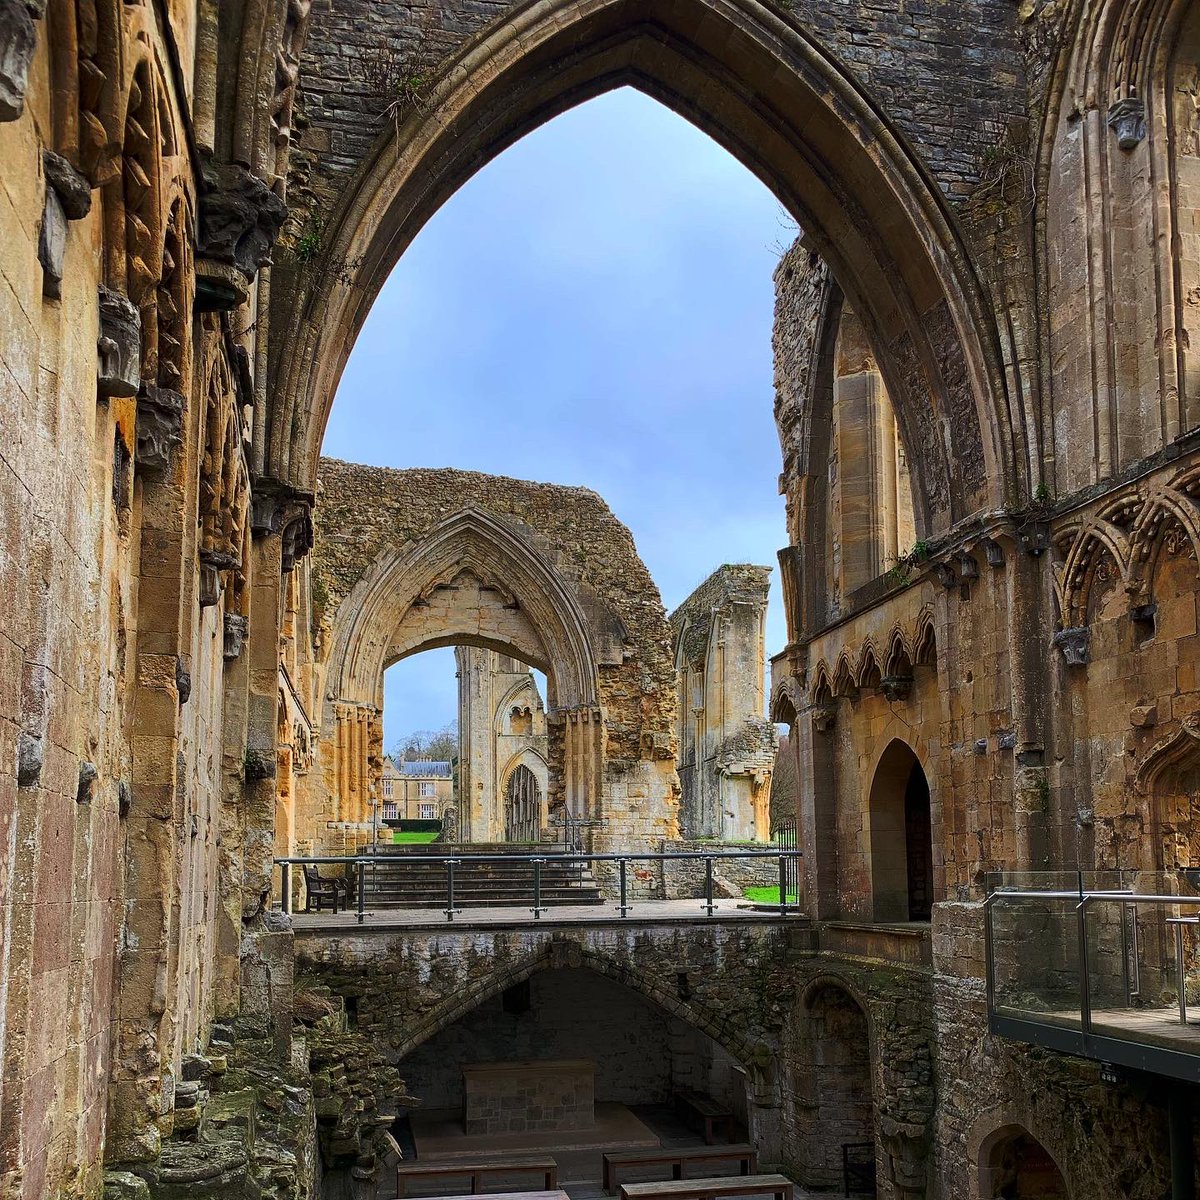 My New Year’s resolution was to go to more medieval sites, and I’m so glad I followed through! The fact that I’d never bothered to take an hour bus journey to Glastonbury is, quite frankly, very disappointing. #glastonburyabbey